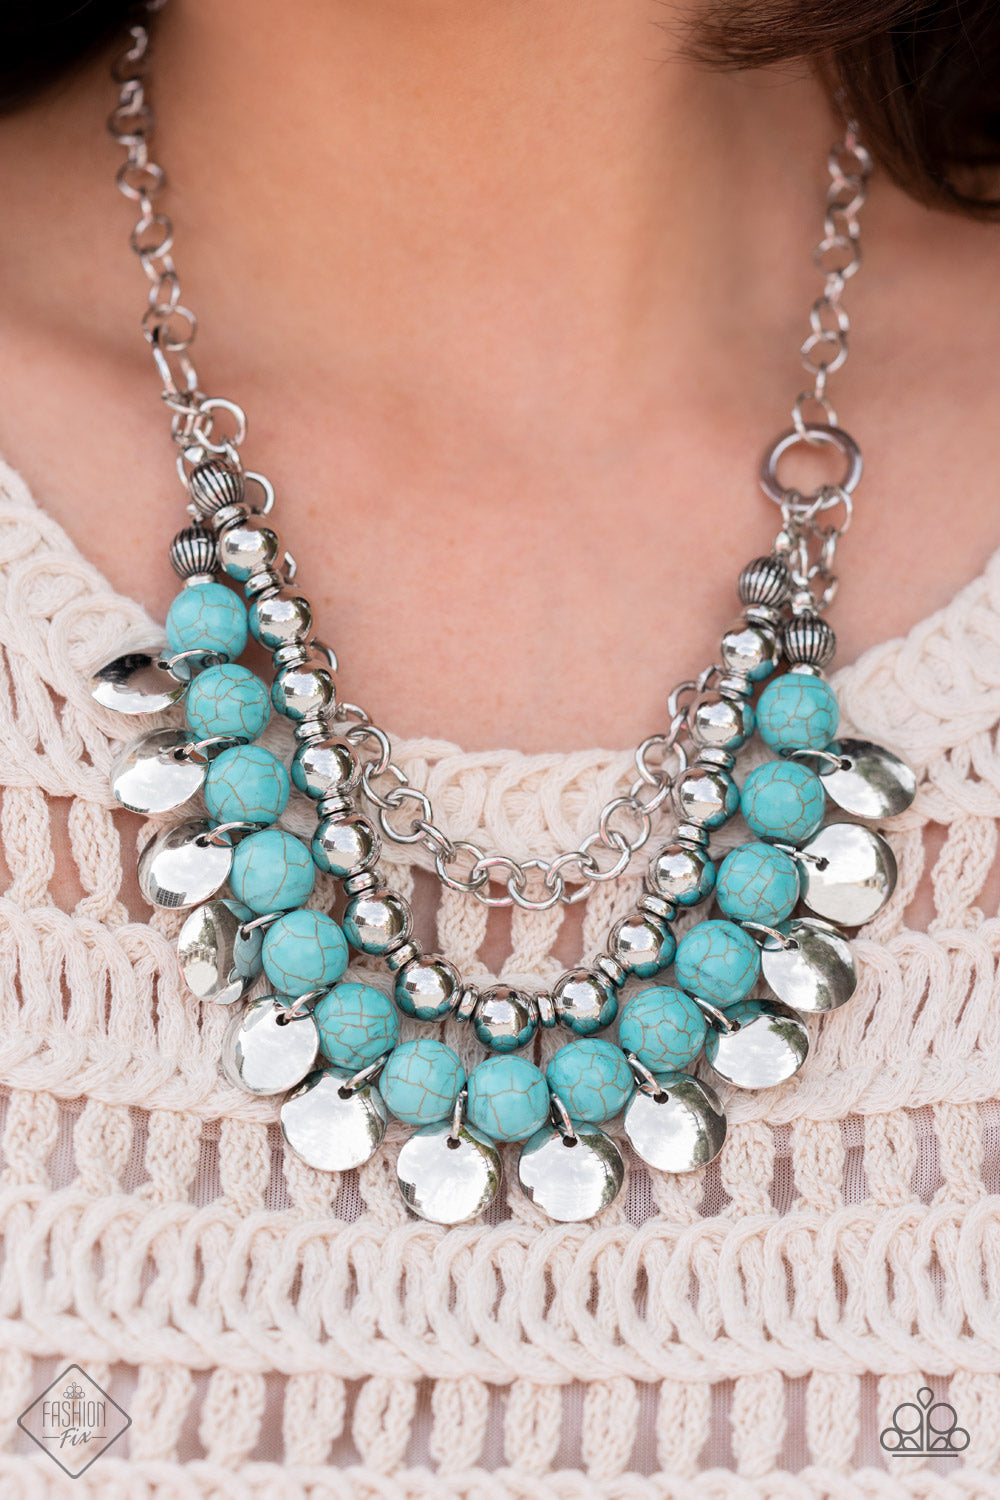 Necklace: 